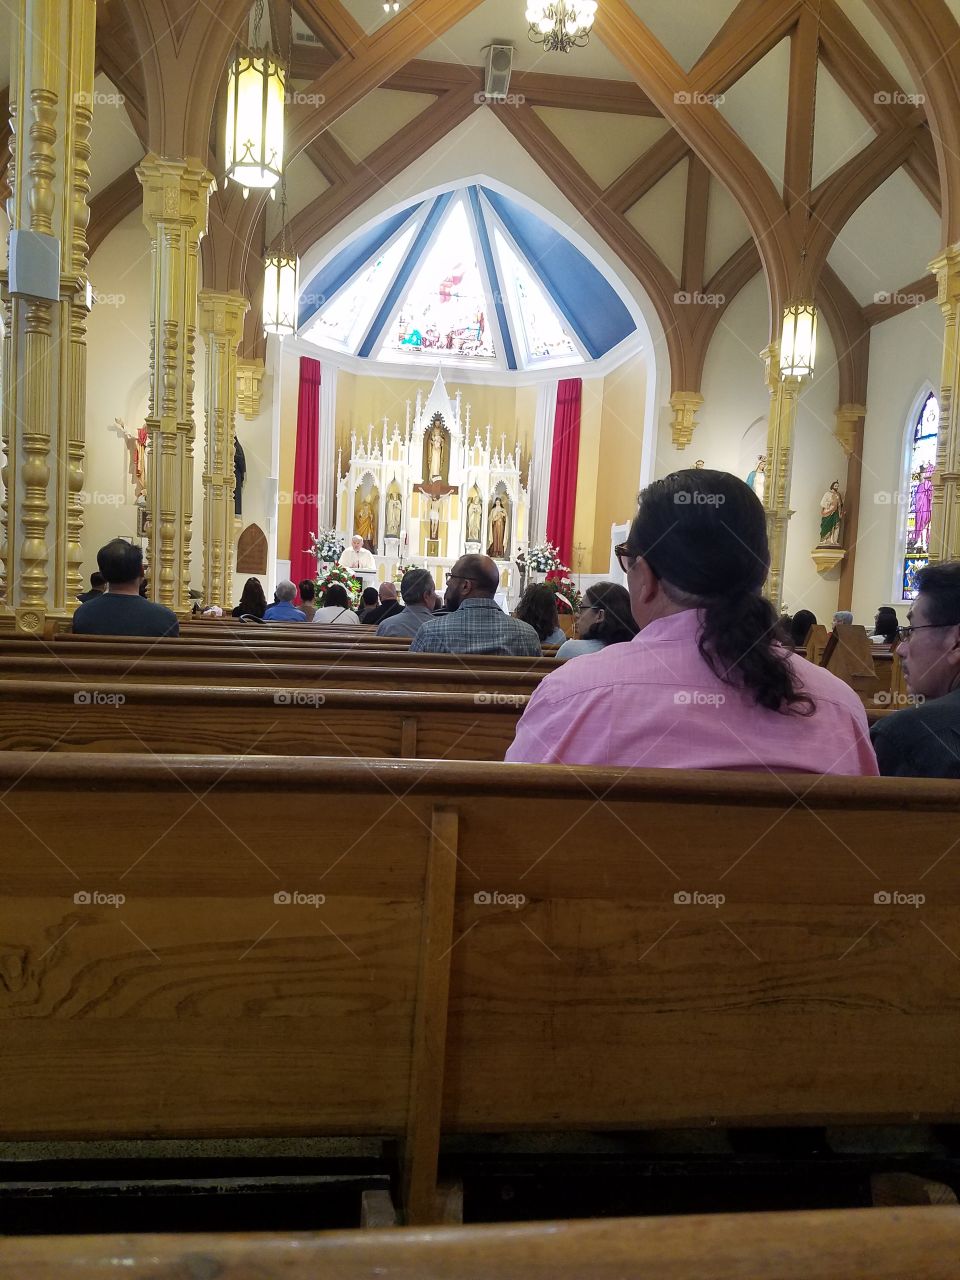 Sitting in the pews of a catholic church during mass.  Listening during the Sunday sermon.